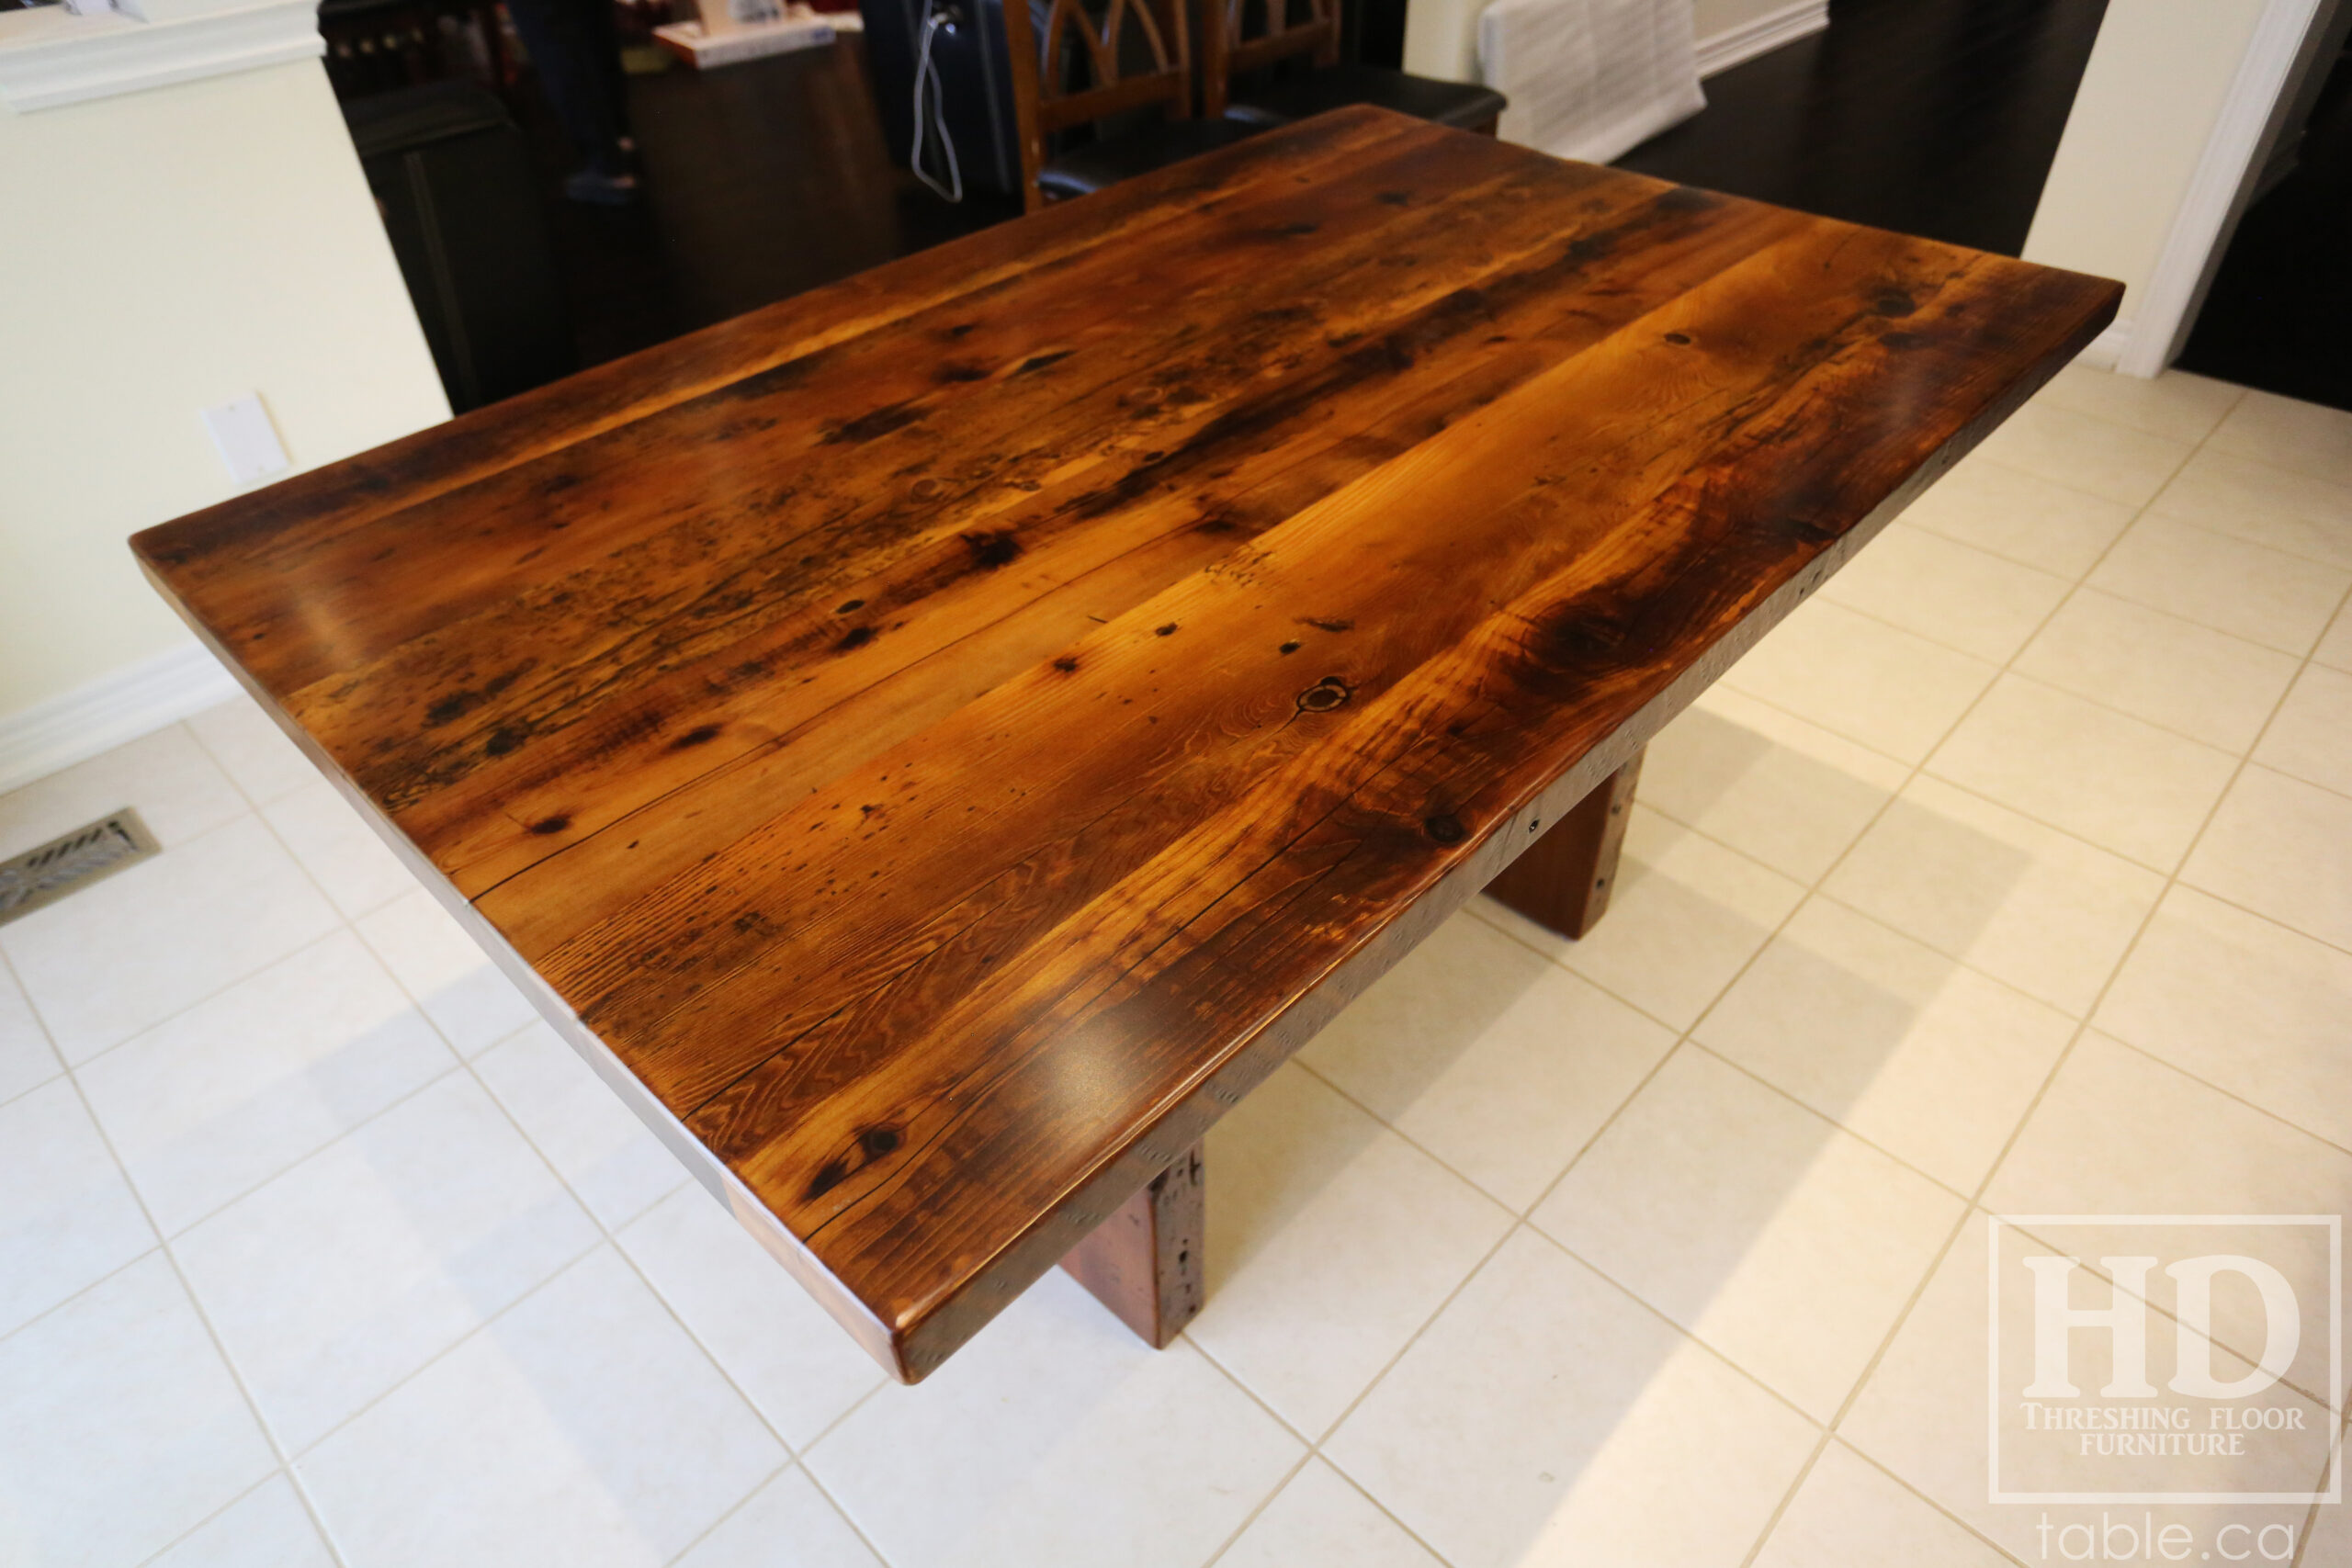 5' Reclaimed Ontario Barnwood Table we made for a Brampton Home - 38" wide - Plank Base Option - Old Growth Hemlock Threshing Floor Construction - Original edges & distressing maintained - Premium epoxy + satin polyurethane finish - No breadboard ends option - One 18" Leaf - www.table.ca